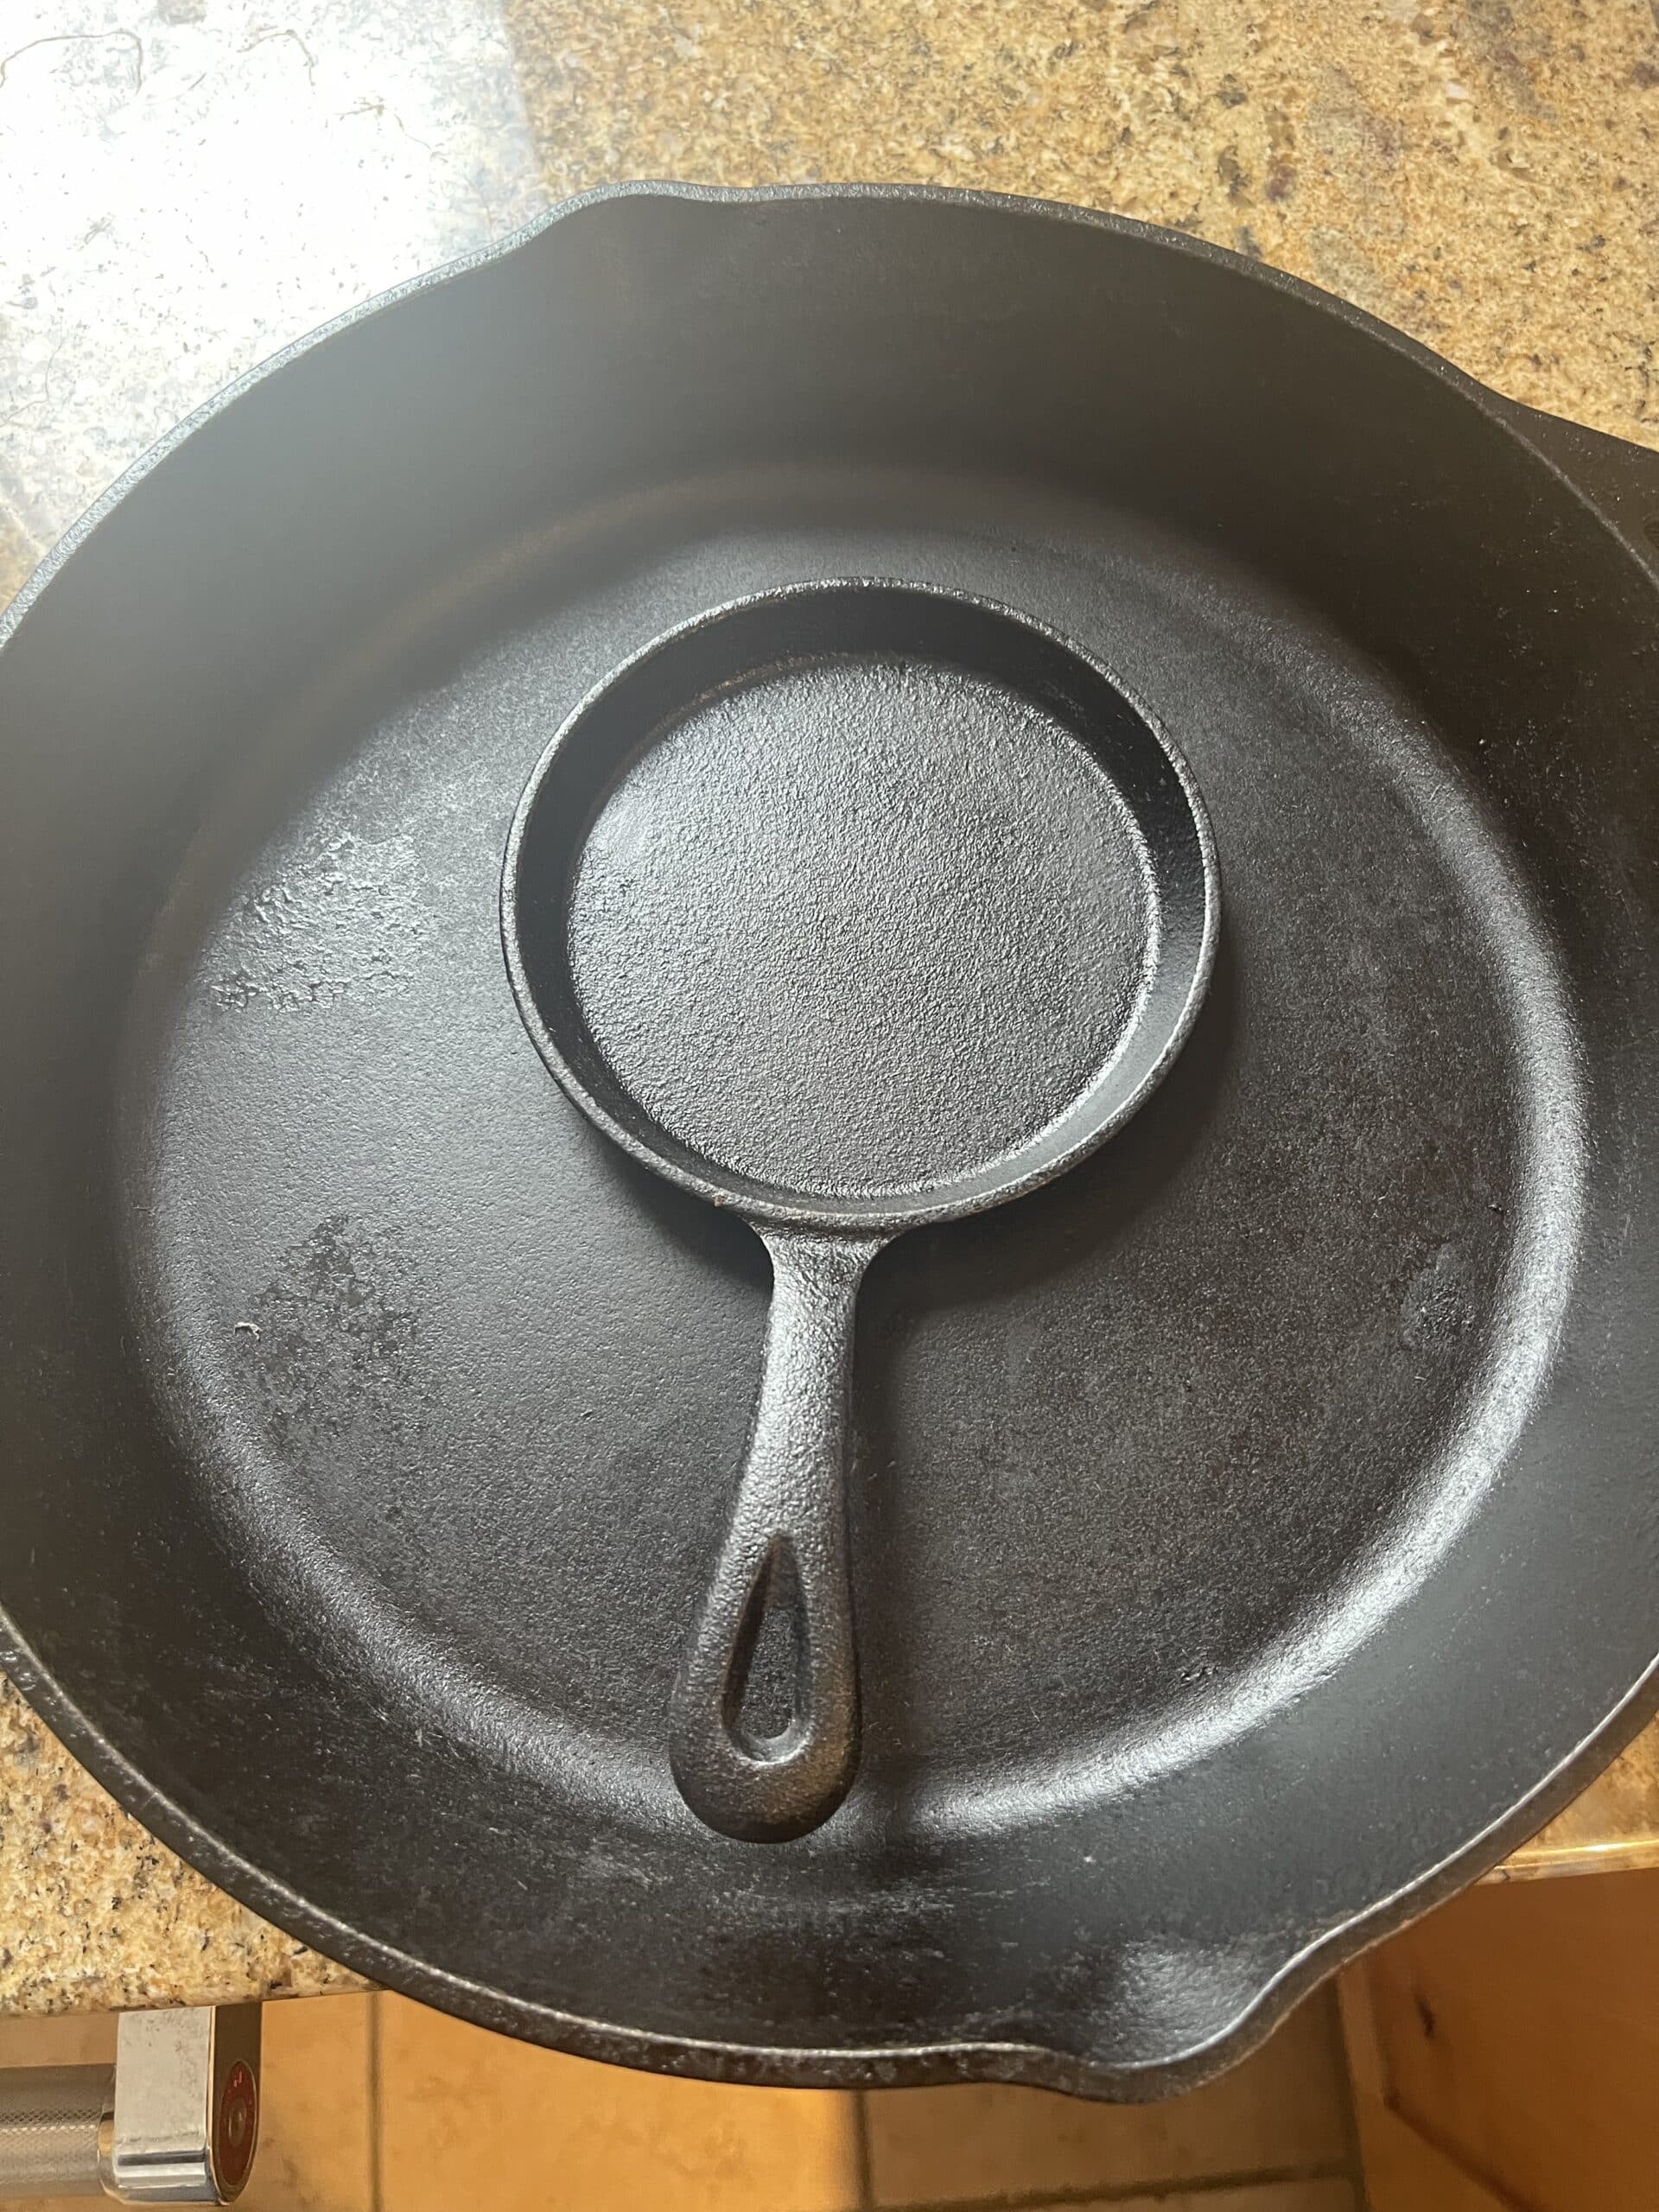 This Lodge Cast-Iron Skillet Has Over 130,000 Positive Reviews [Updated]